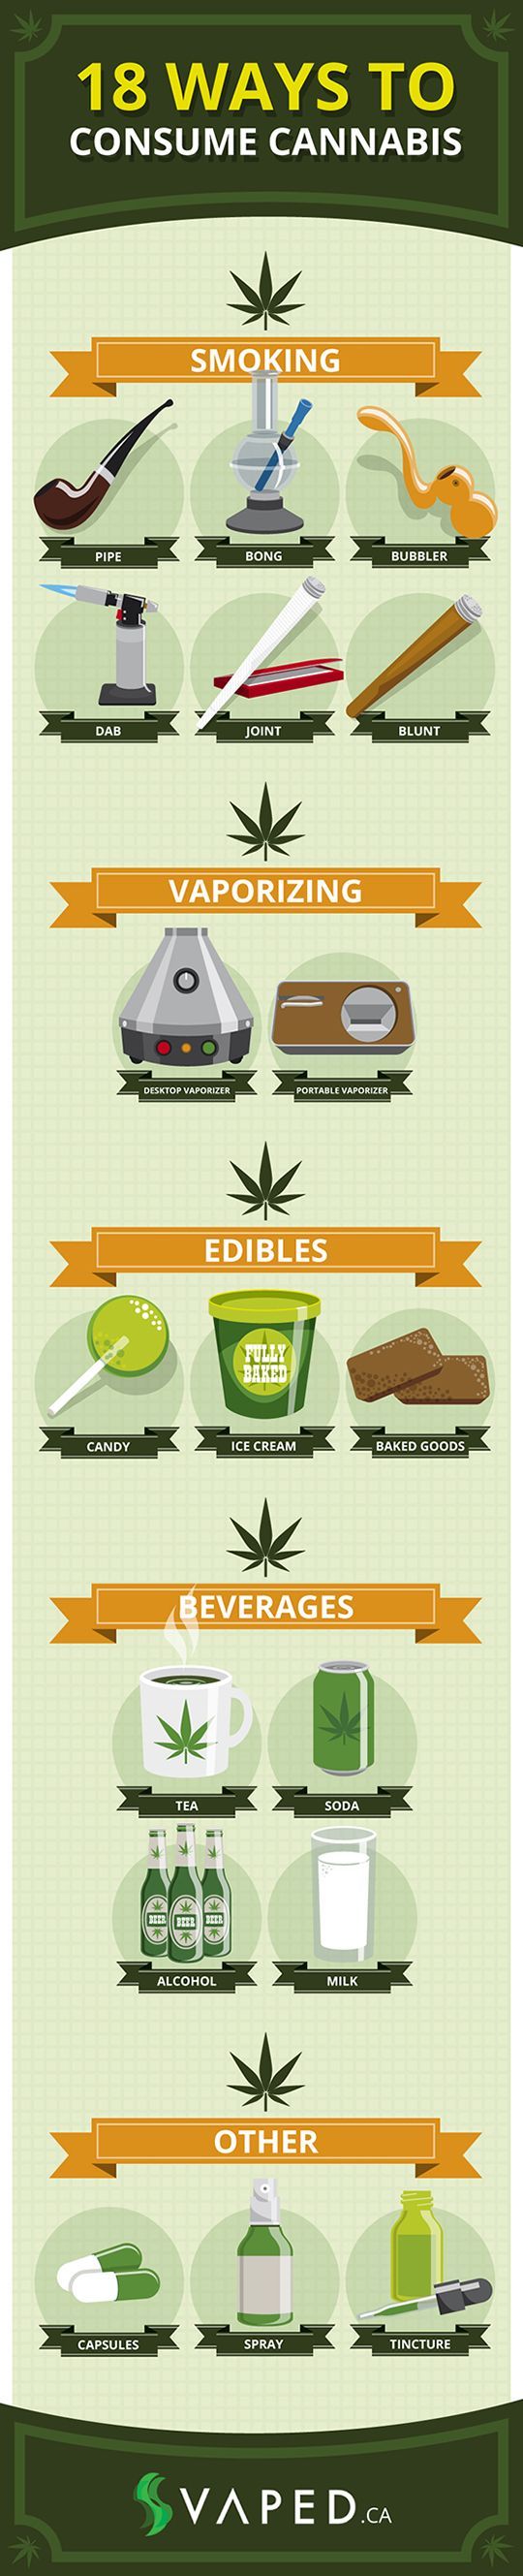 ways to consume cannabis